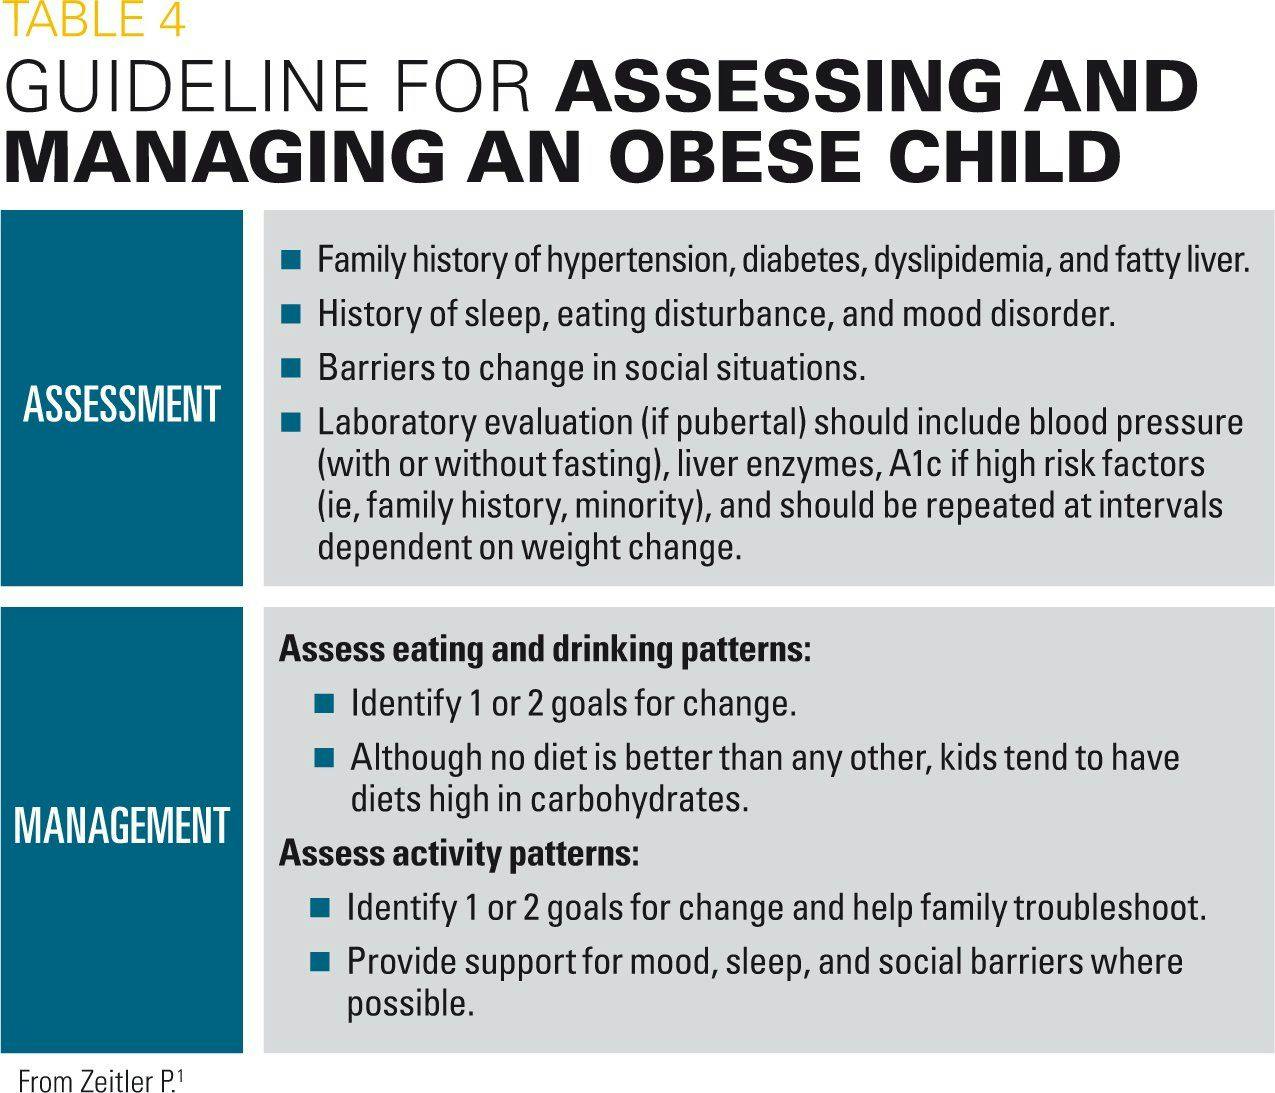 A table looking at guidelines for assessing and managing the obese child